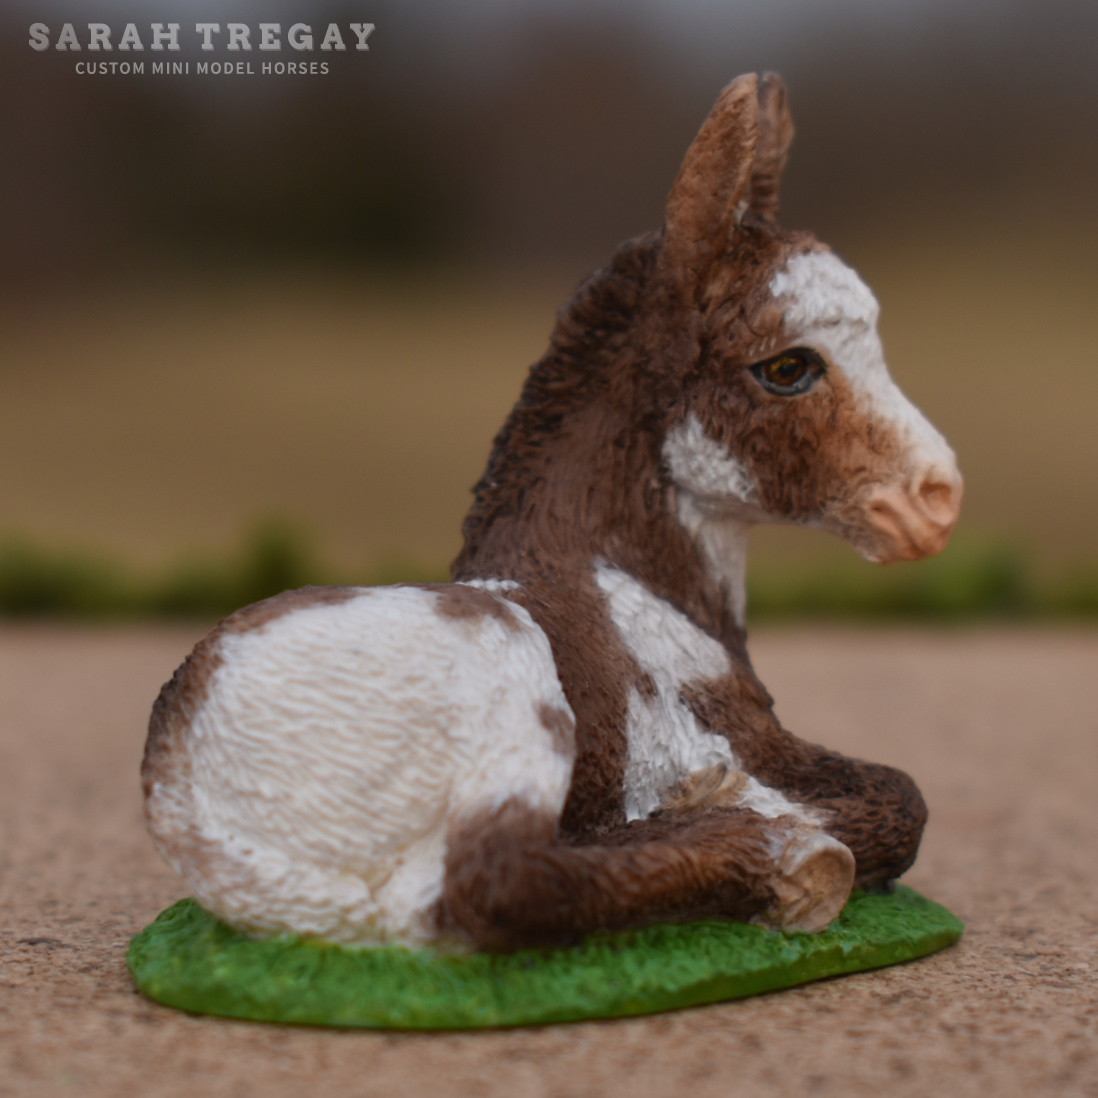 Resin doney foal painted by Sarah Tregay